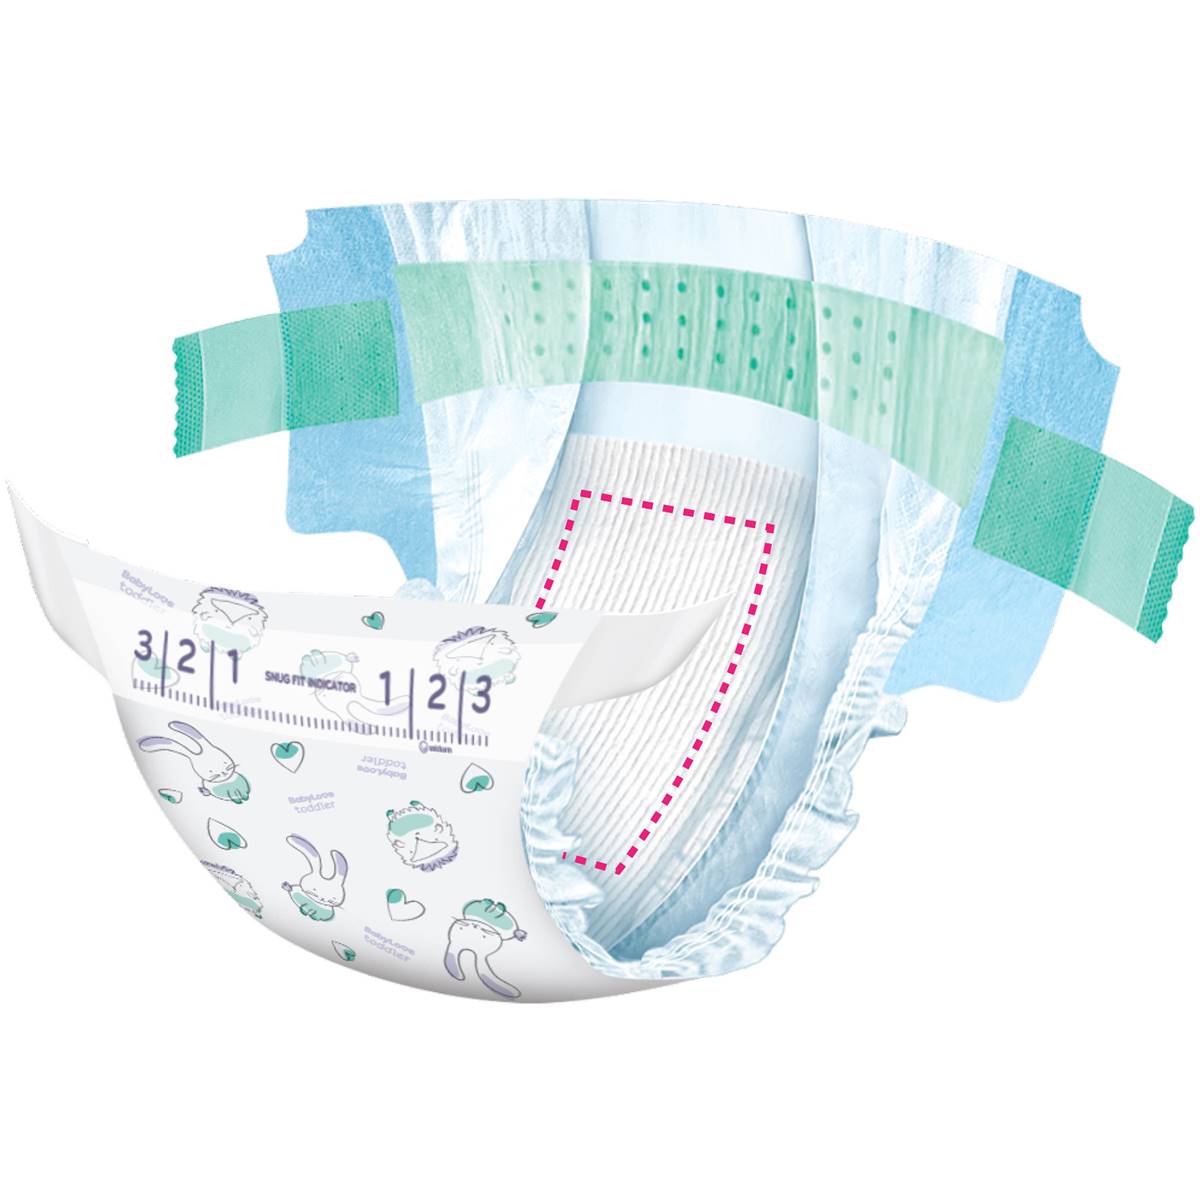 Babylove Cosifit Nappies Size 6 (15-25kg) - (4*15pkt)